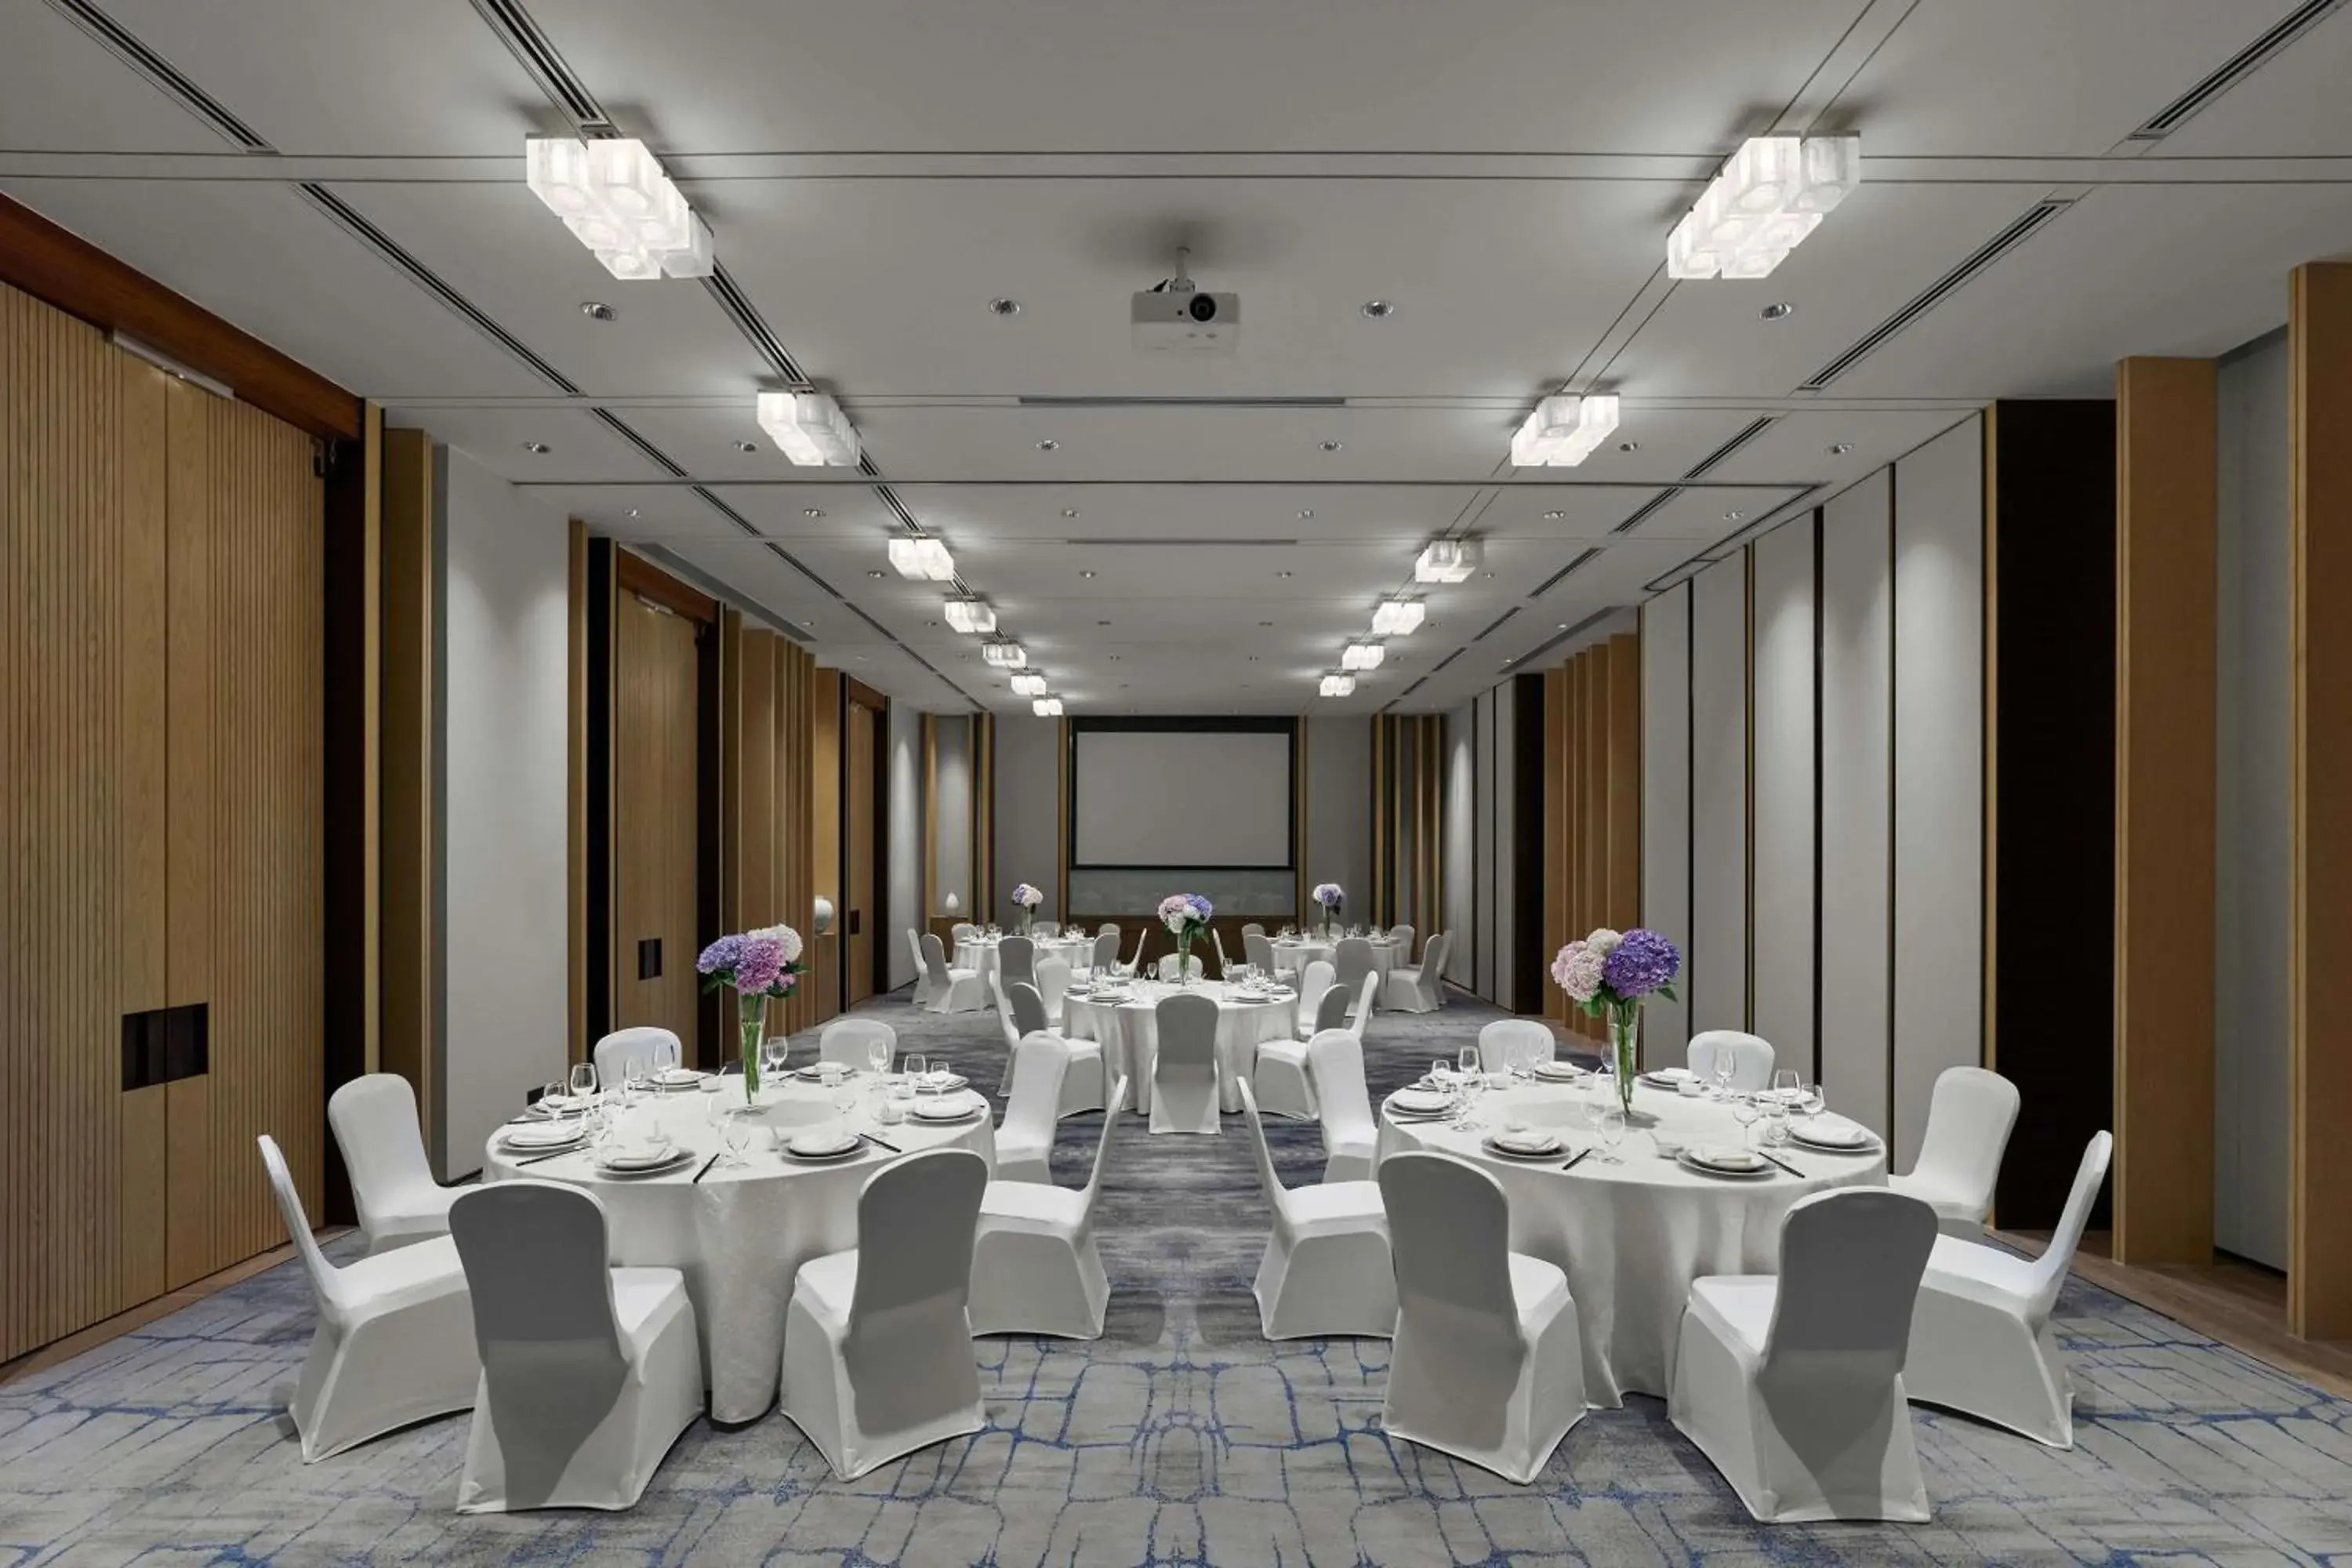 Meeting/conference room, Banquet Facilities in Hilton Suzhou Yinshan Lake